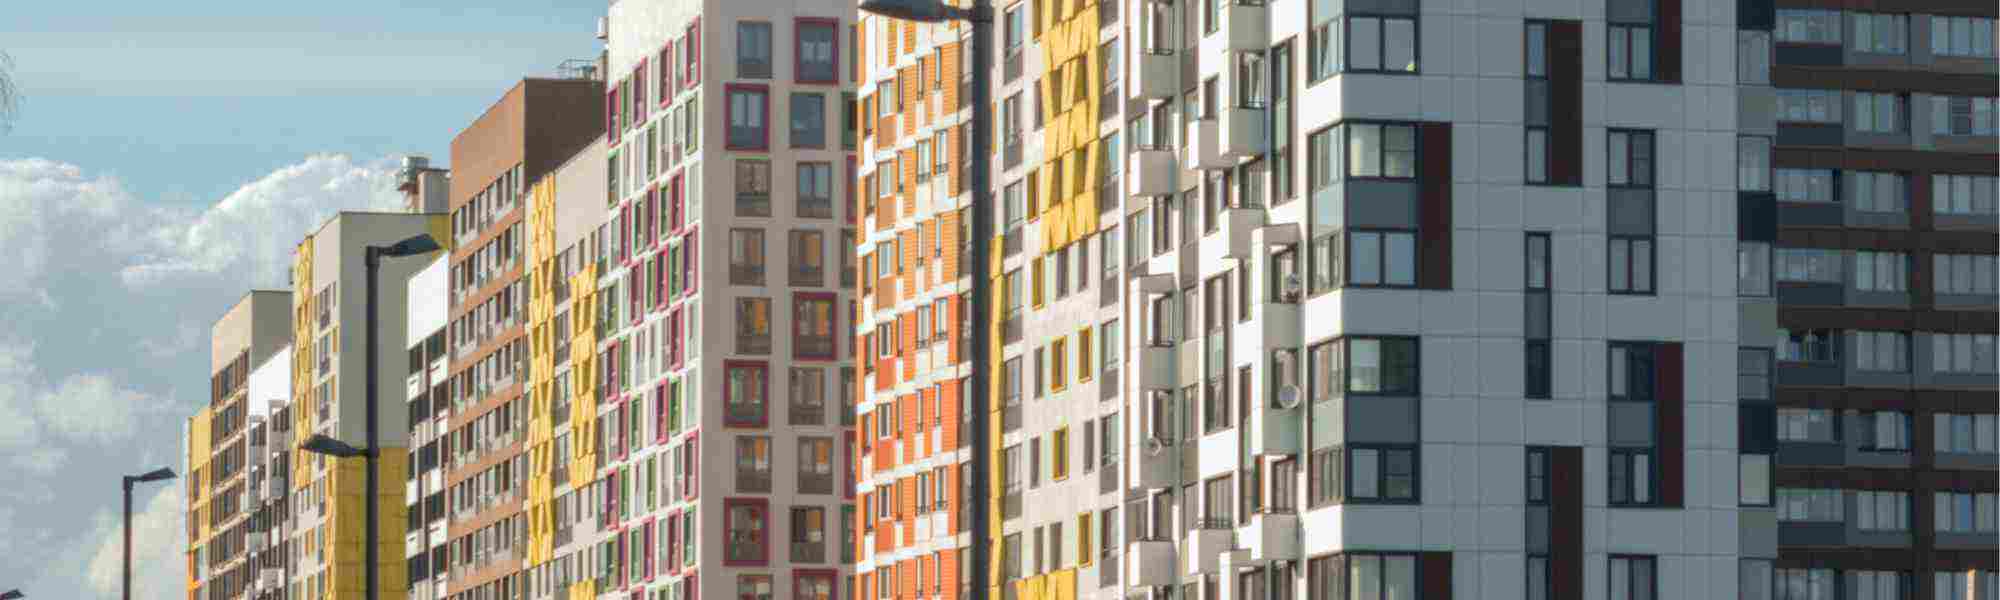 Leaseholders hit with extortionate insurance premiums – Insurance Times